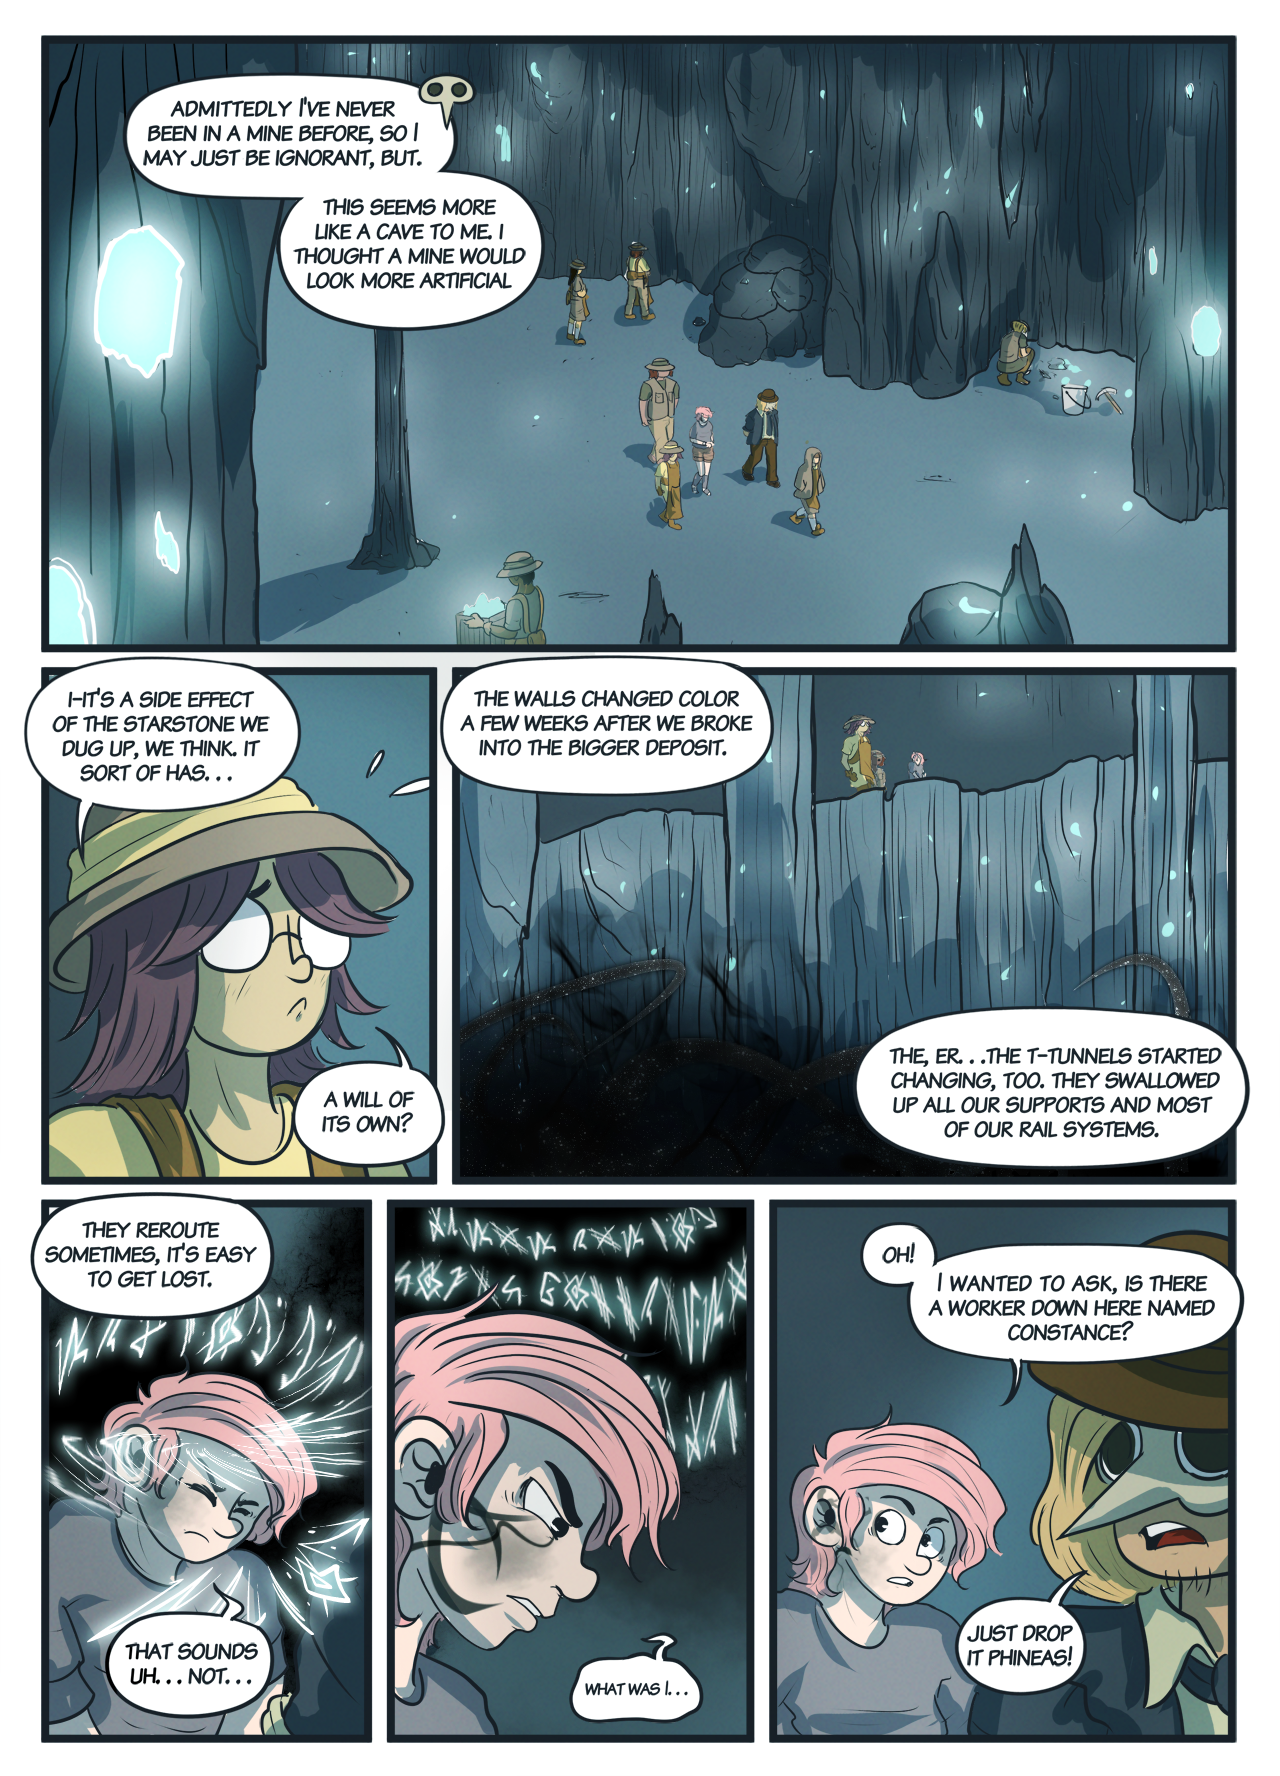 This is a comic about shiny rocks now I guess.